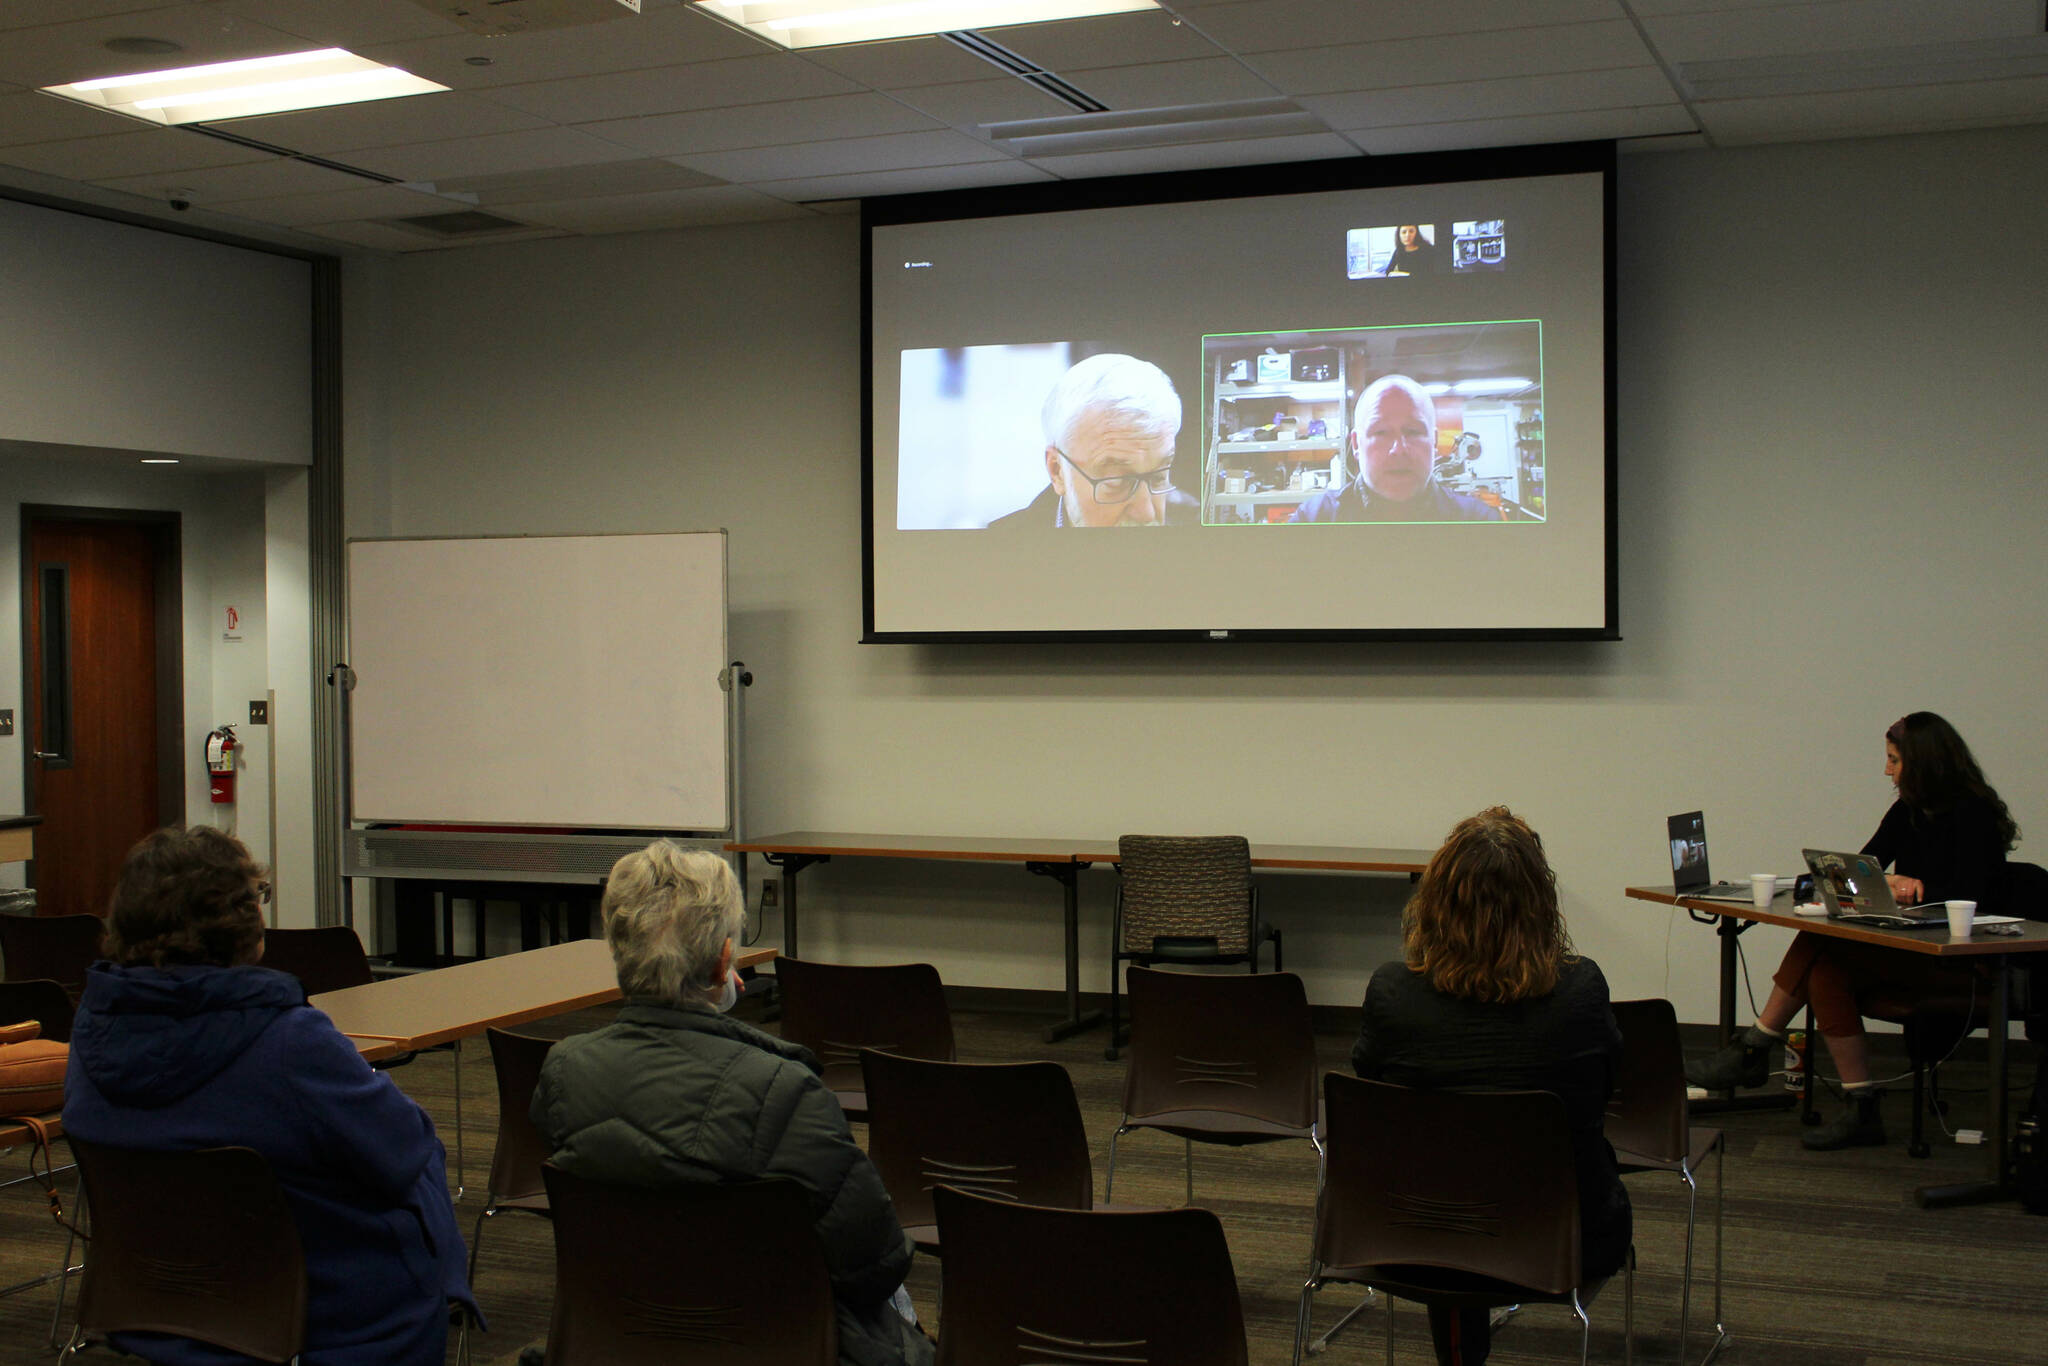 Candidates for Alaska State Senate District C Gary Stevens, on screen, left, and Heath Smith, on screen, right, participate remotely in a forum held at the Soldotna Public Library on Monday, Oct. 24, 2022 in Soldotna, Alaska. (Ashlyn O’Hara/Peninsula Clarion)